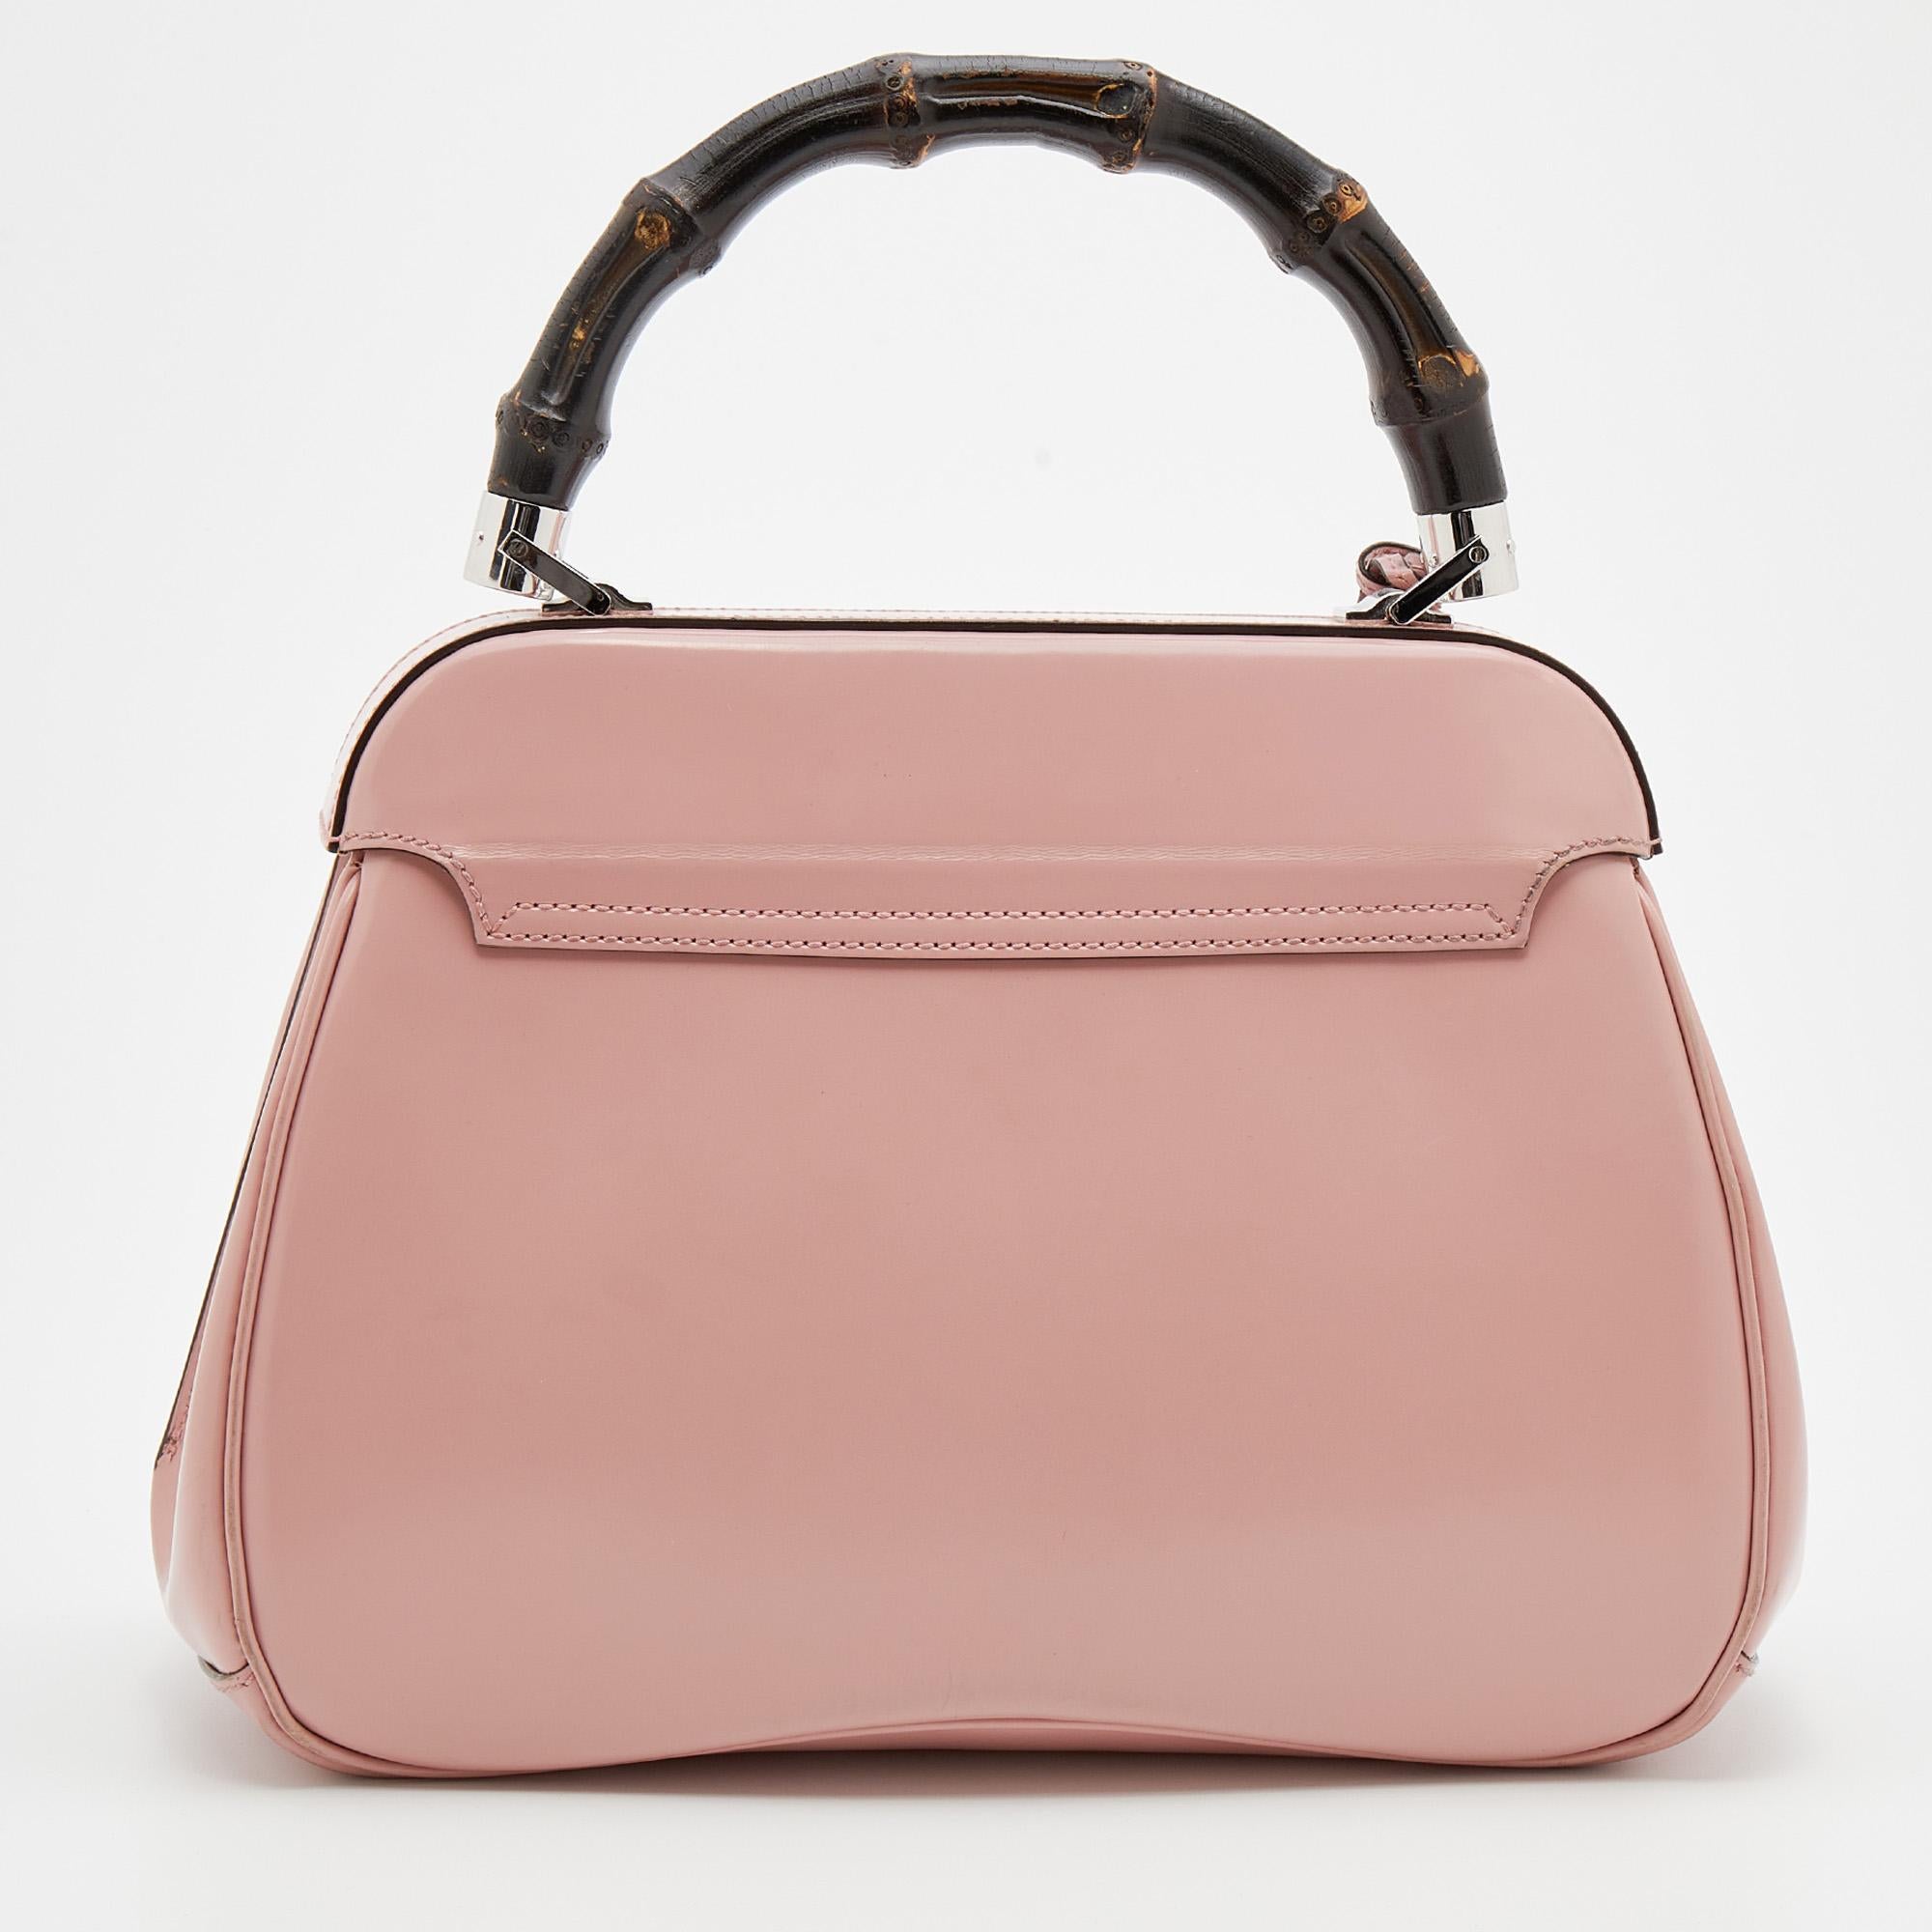 Crafted from pink leather, this fabulous Gucci bag has a front flap that is detailed with the signature Lady Lock and opens to a roomy interior. It also flaunts a single bamboo top handle. Make it your own today!

Includes: Original Dustbag, Keys,